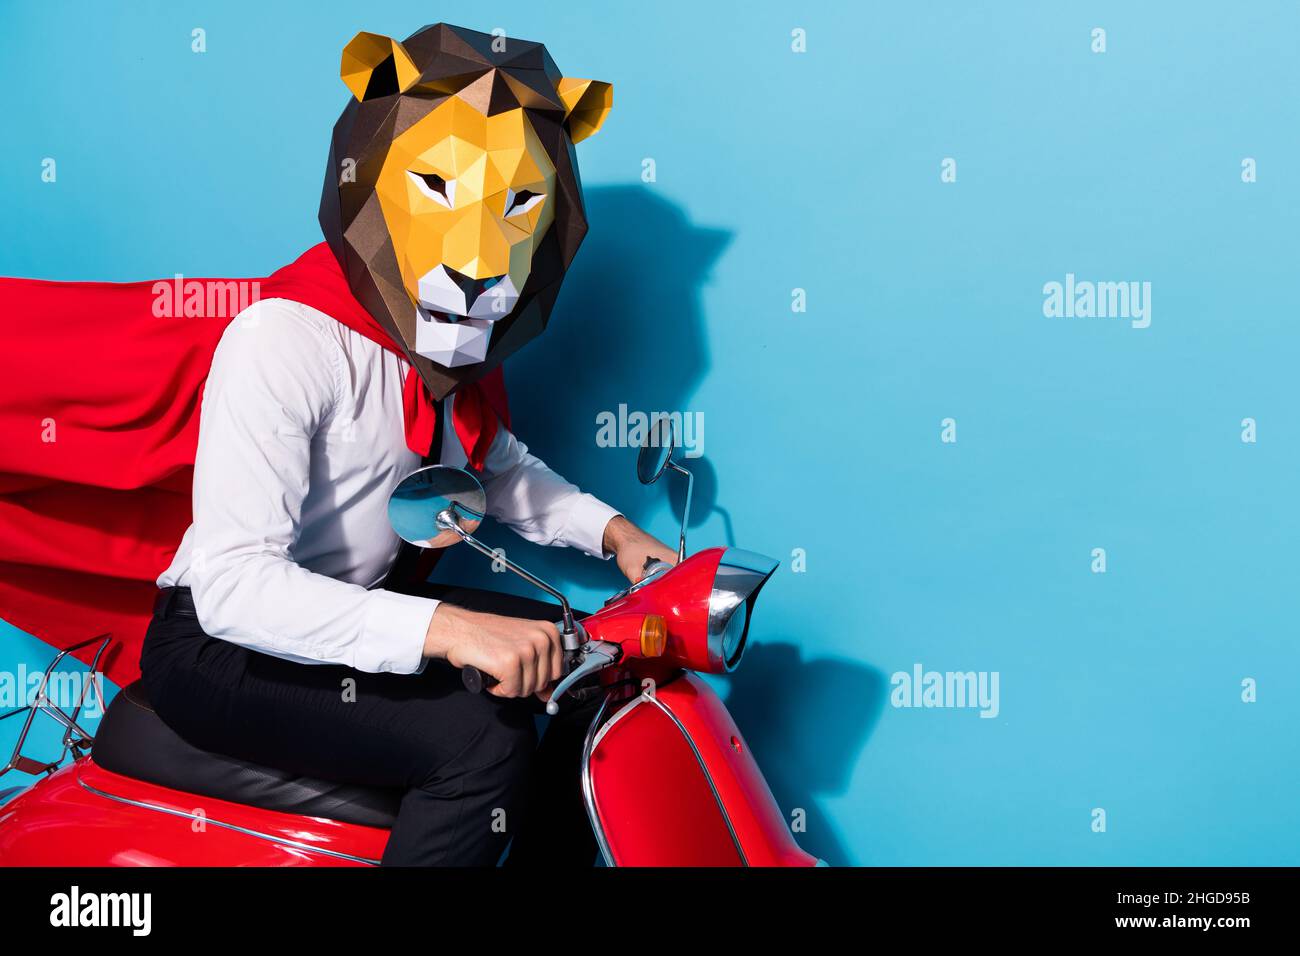 Photo of weird freak fantasy guy in lion mask ride scooter safe world theme festive event isolated over blue color background Stock Photo